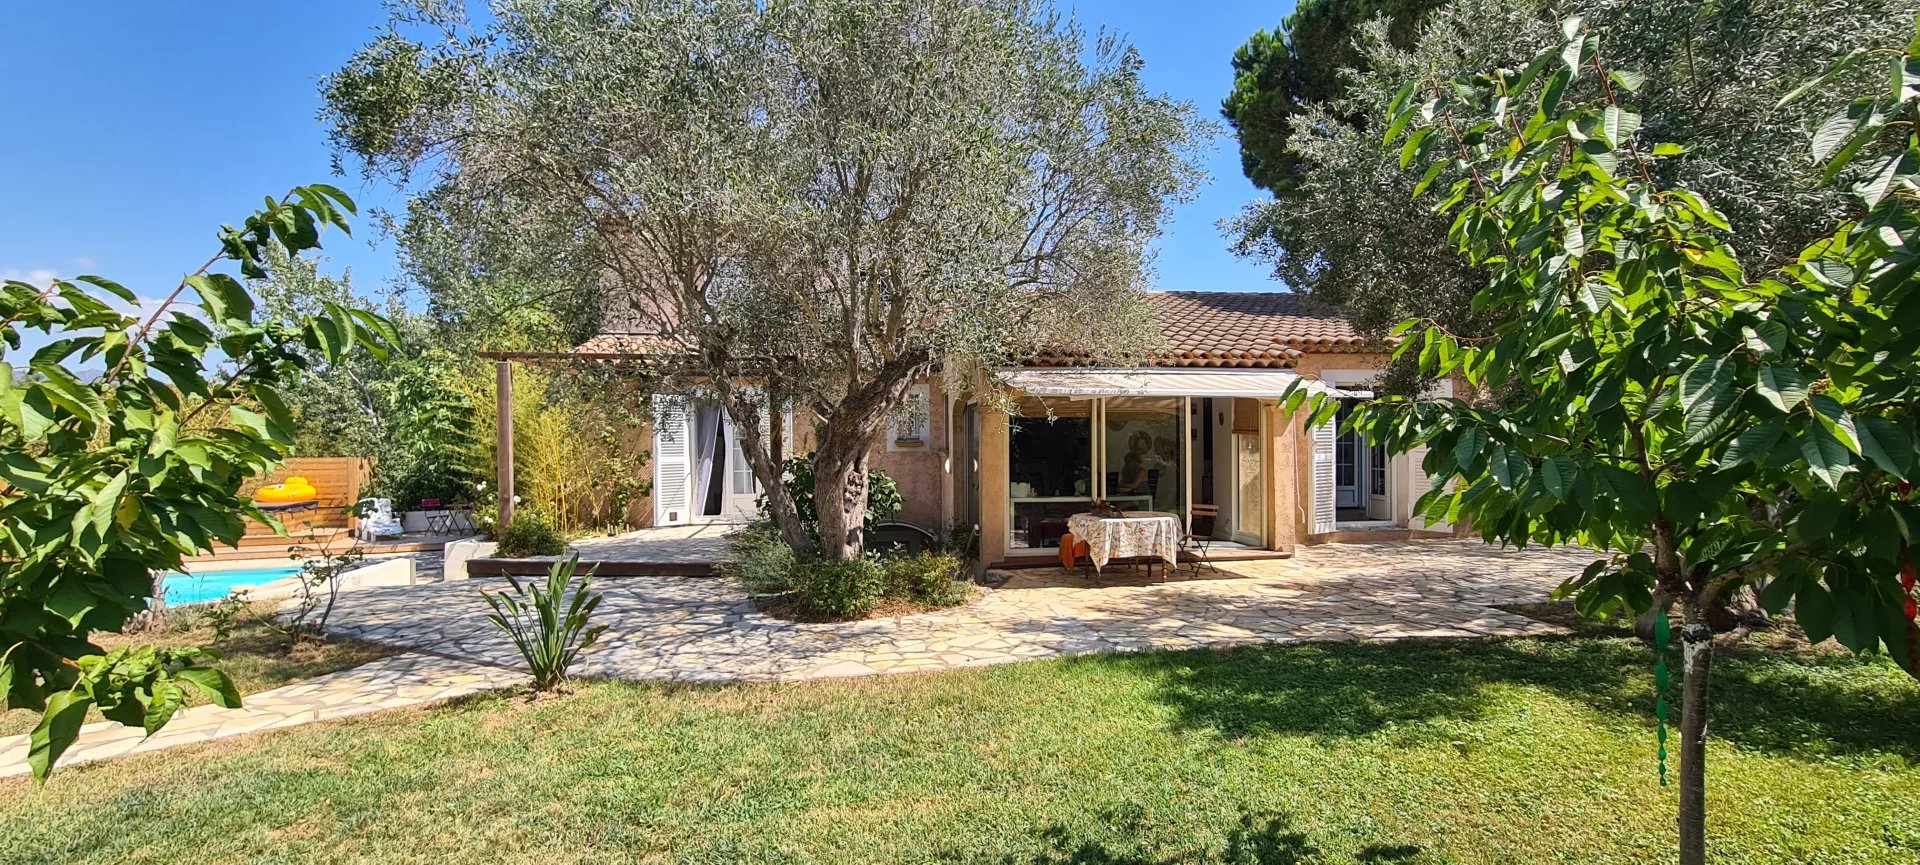 6 ROOMS VILLA with POOL AT FREJUS RESIDENTIAL AREA